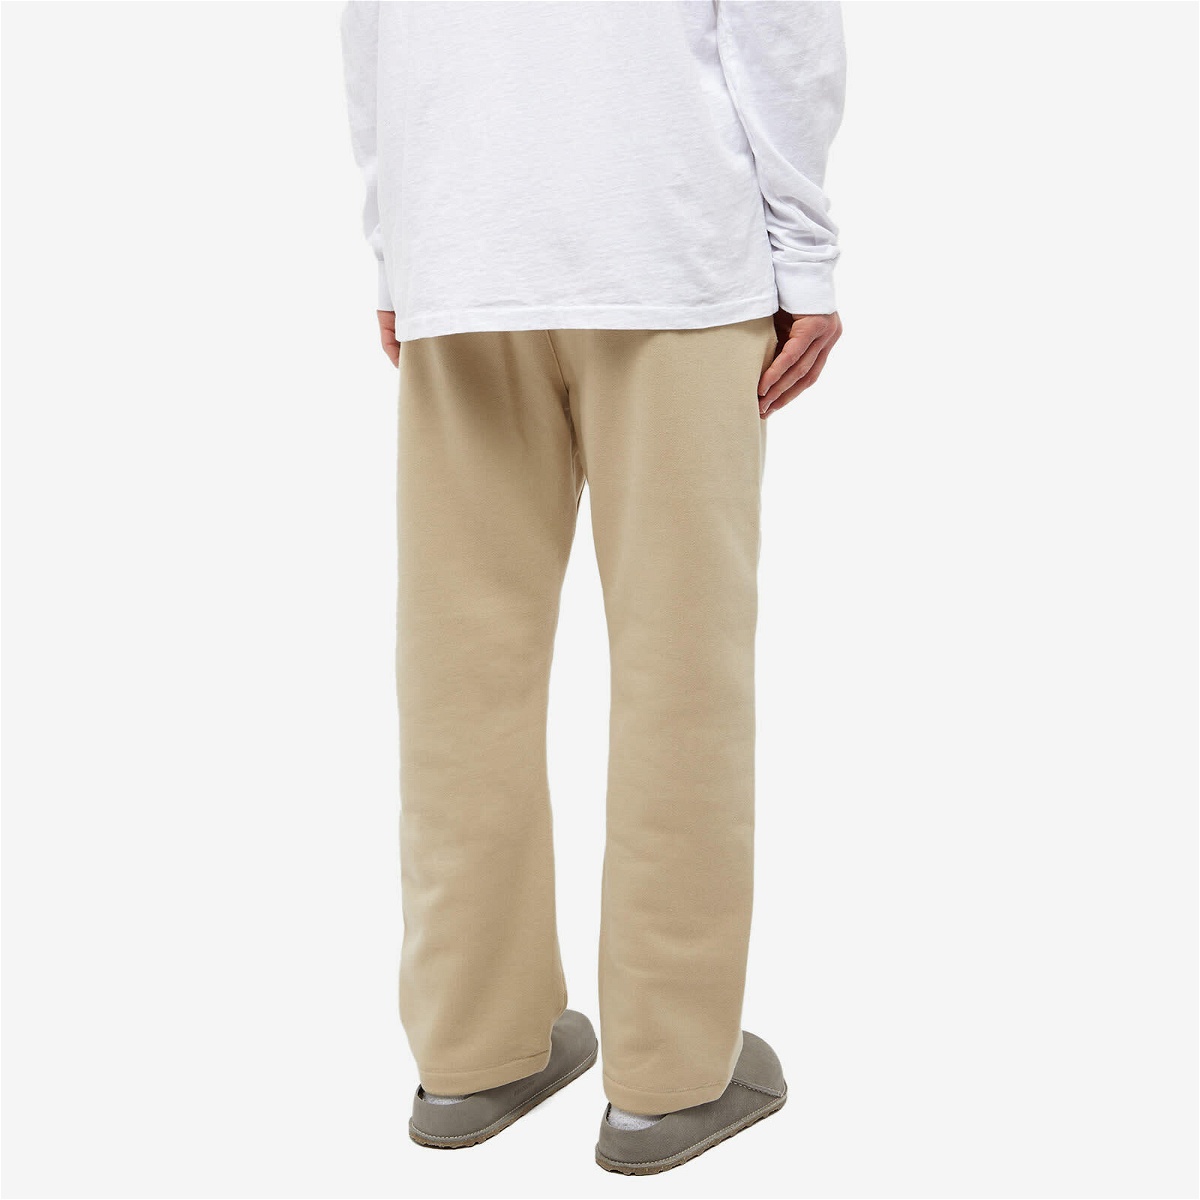 Fear of God ESSENTIALS Men's Relaxed Sweat Pant in Sand Fear